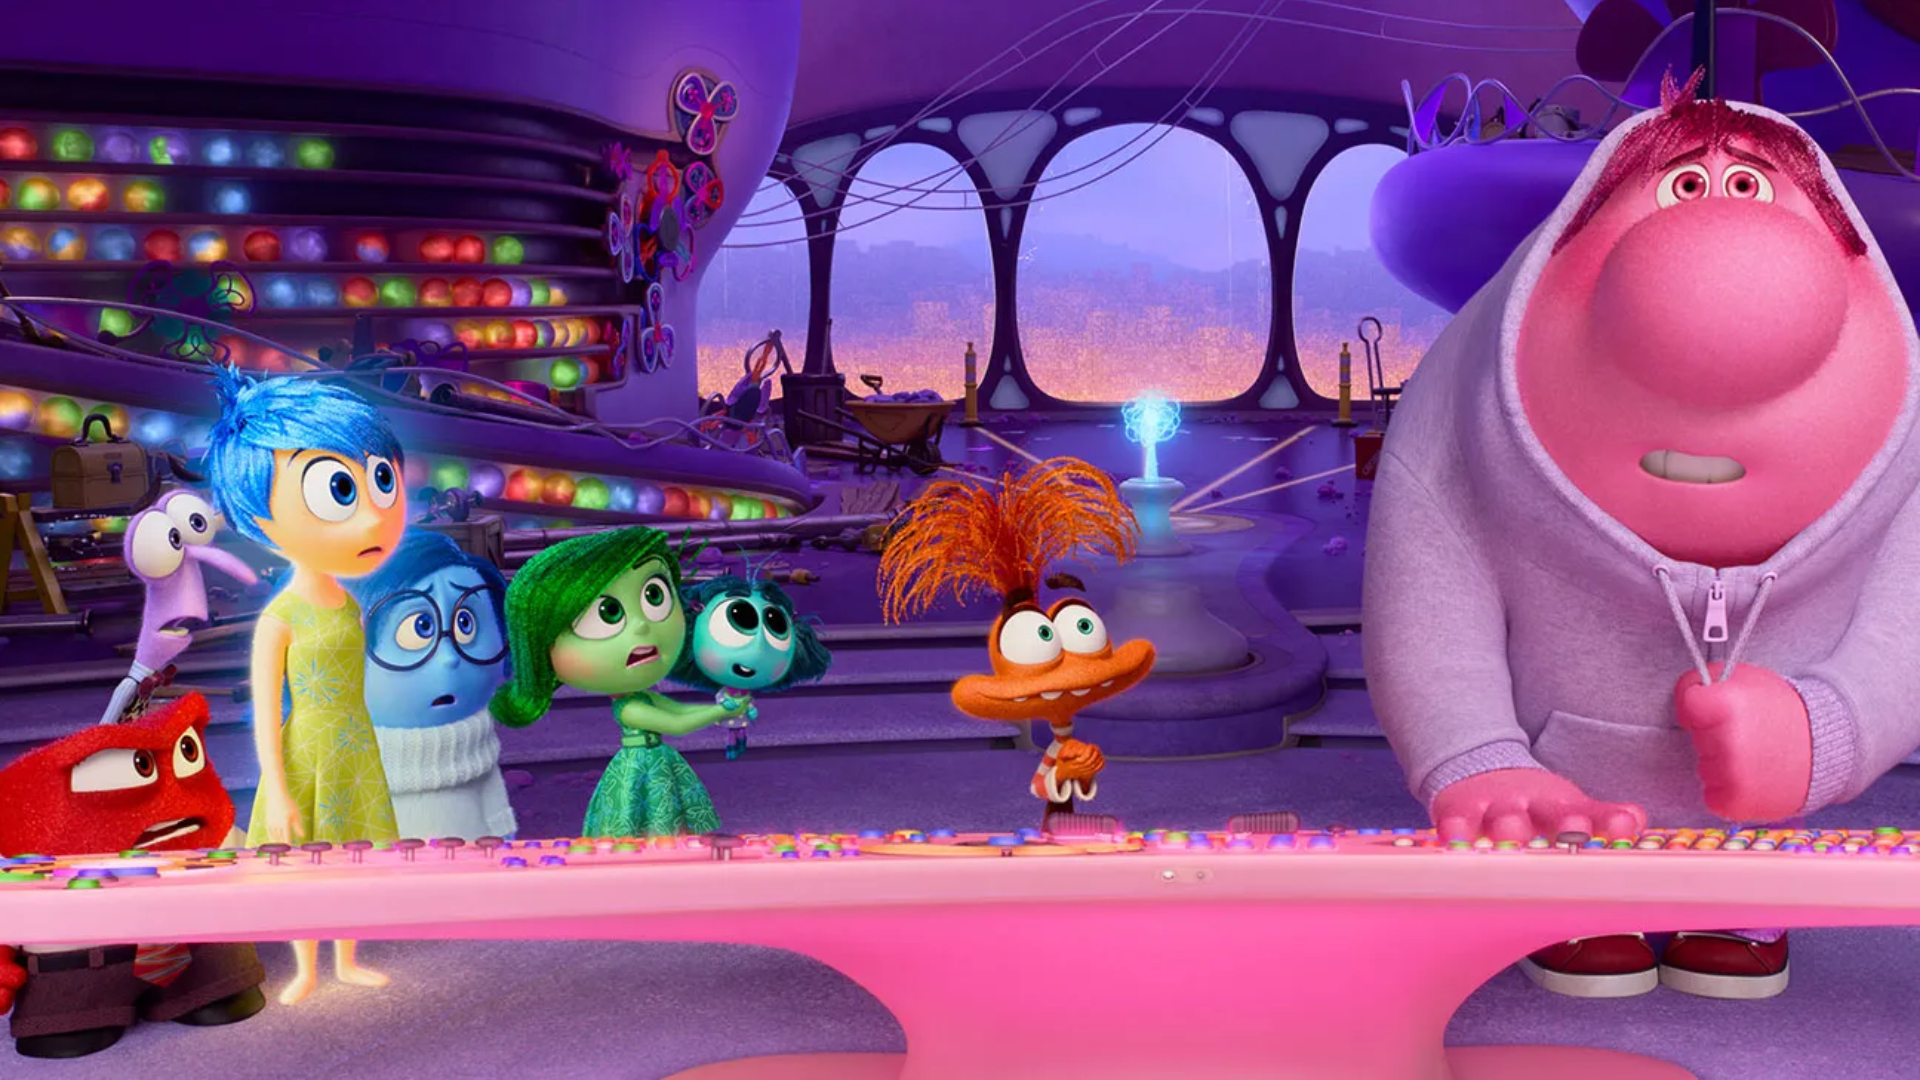 Inside Out 2 became the highest-grossing animated film ever: it overtook Frozen 2, which had held the record since 2019